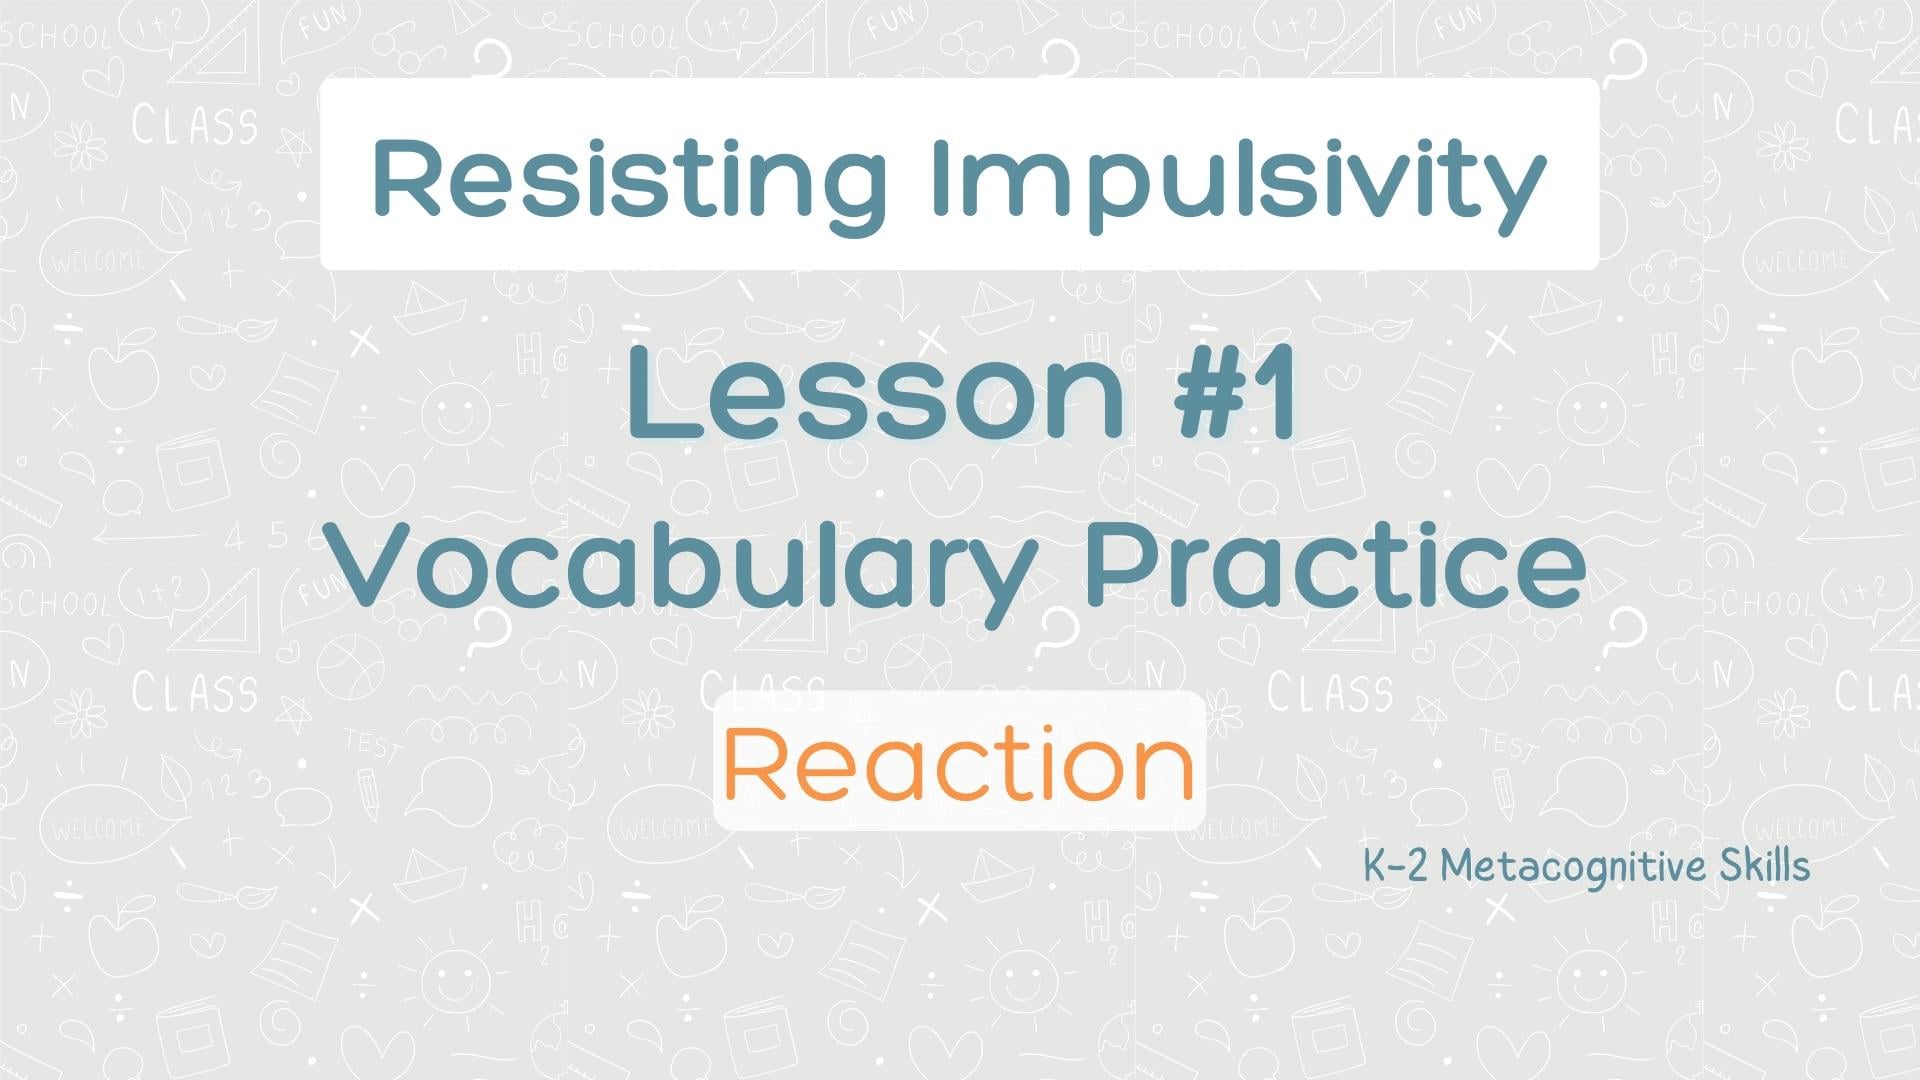 Lesson #1 Vocabulary Practice: Reaction video thumbnail